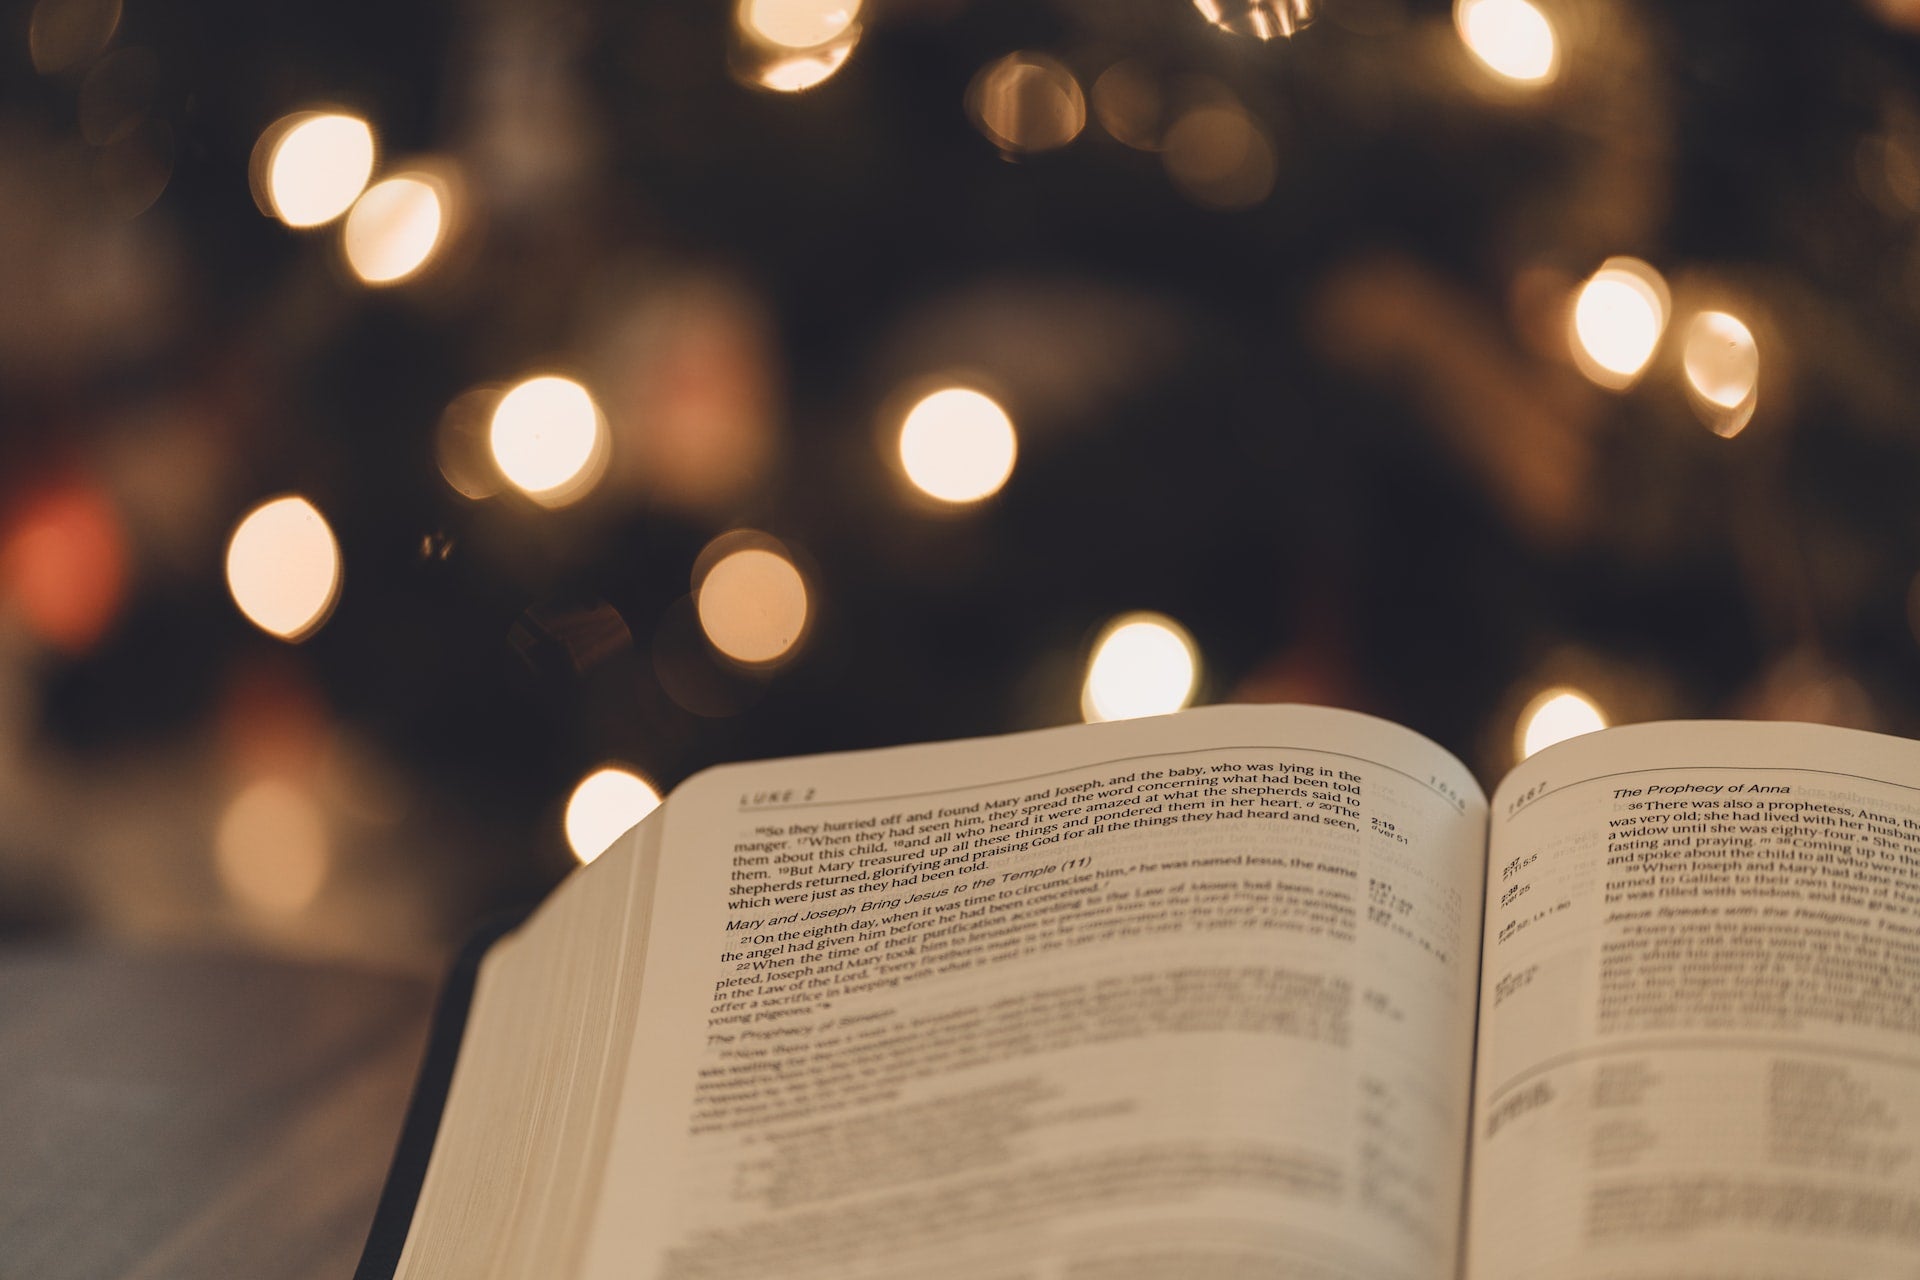 The Best 10 Bible Verses to Focus on This Christmas